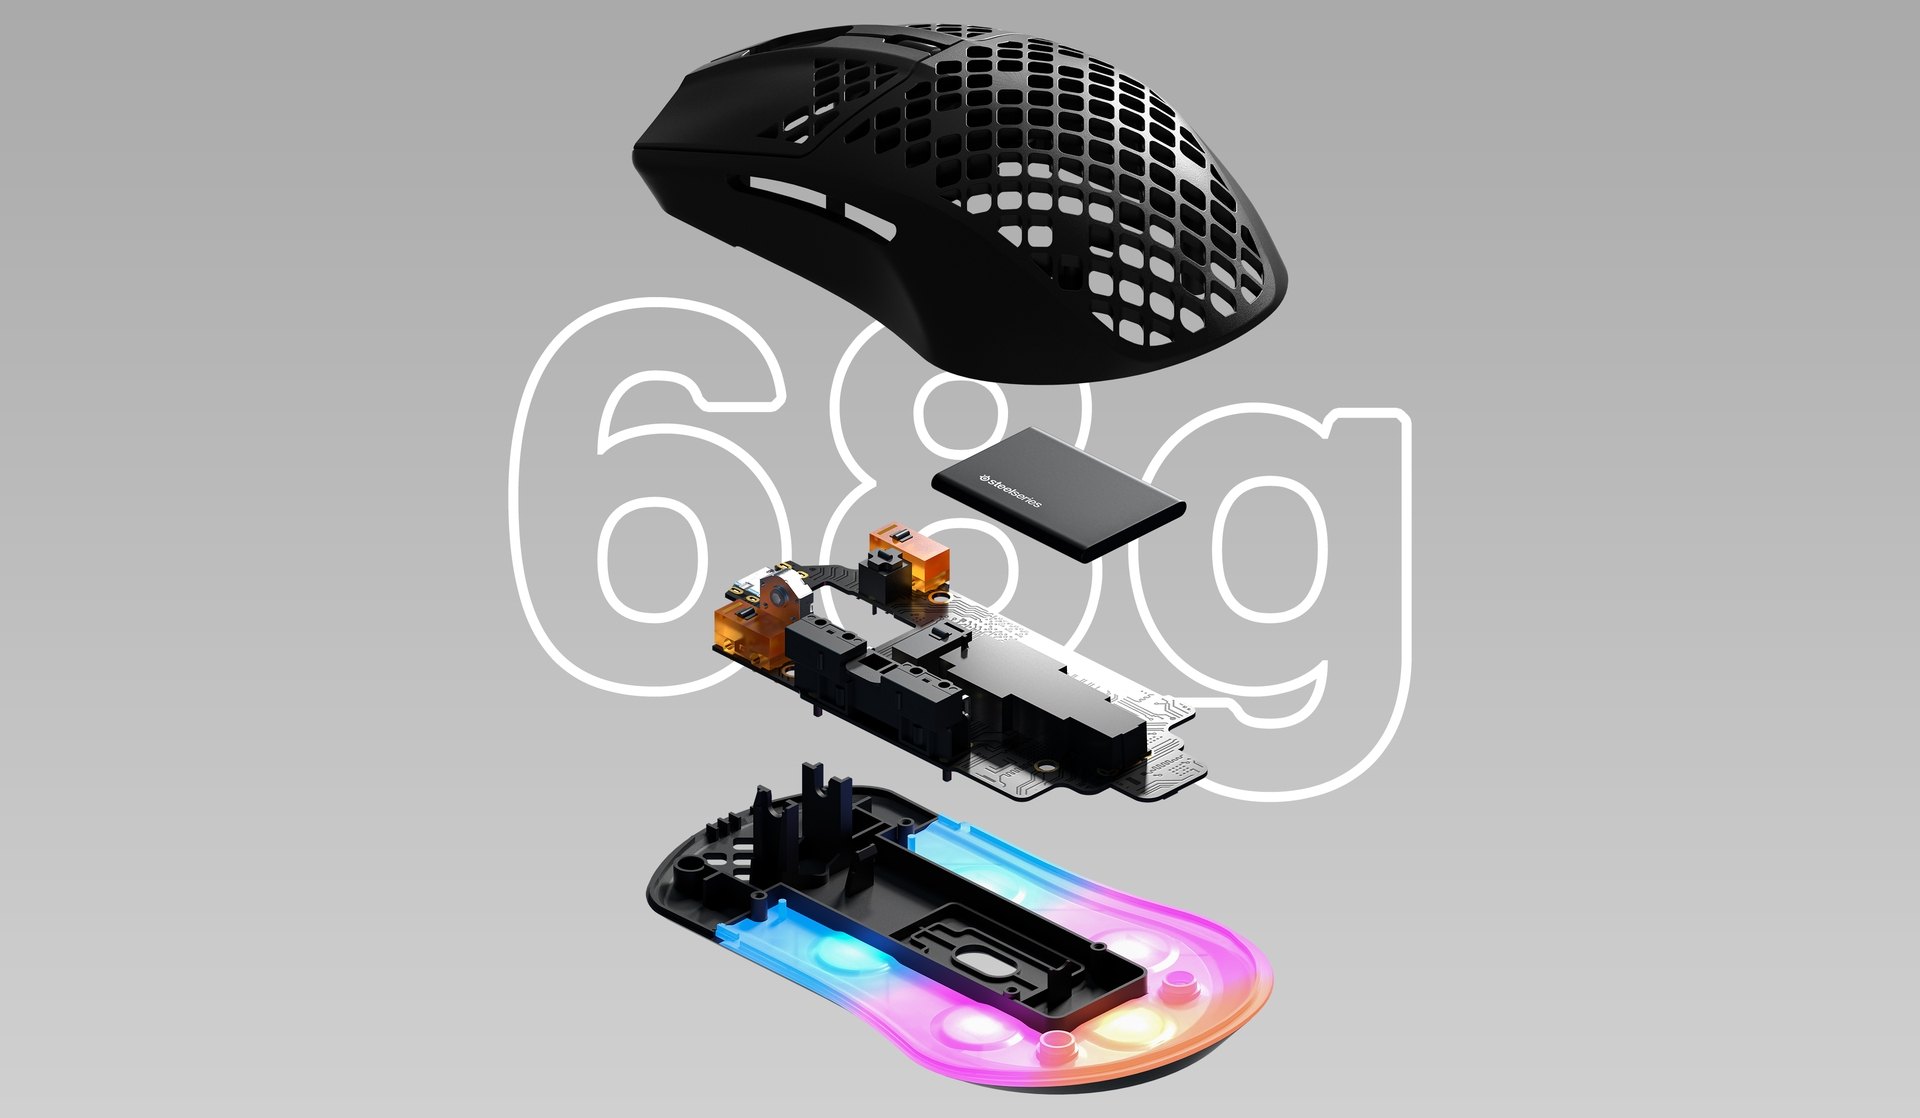 Aerox 3 Wireless 2022 mouse, with all the parts shown vertically. Text behind image reads "68 g".